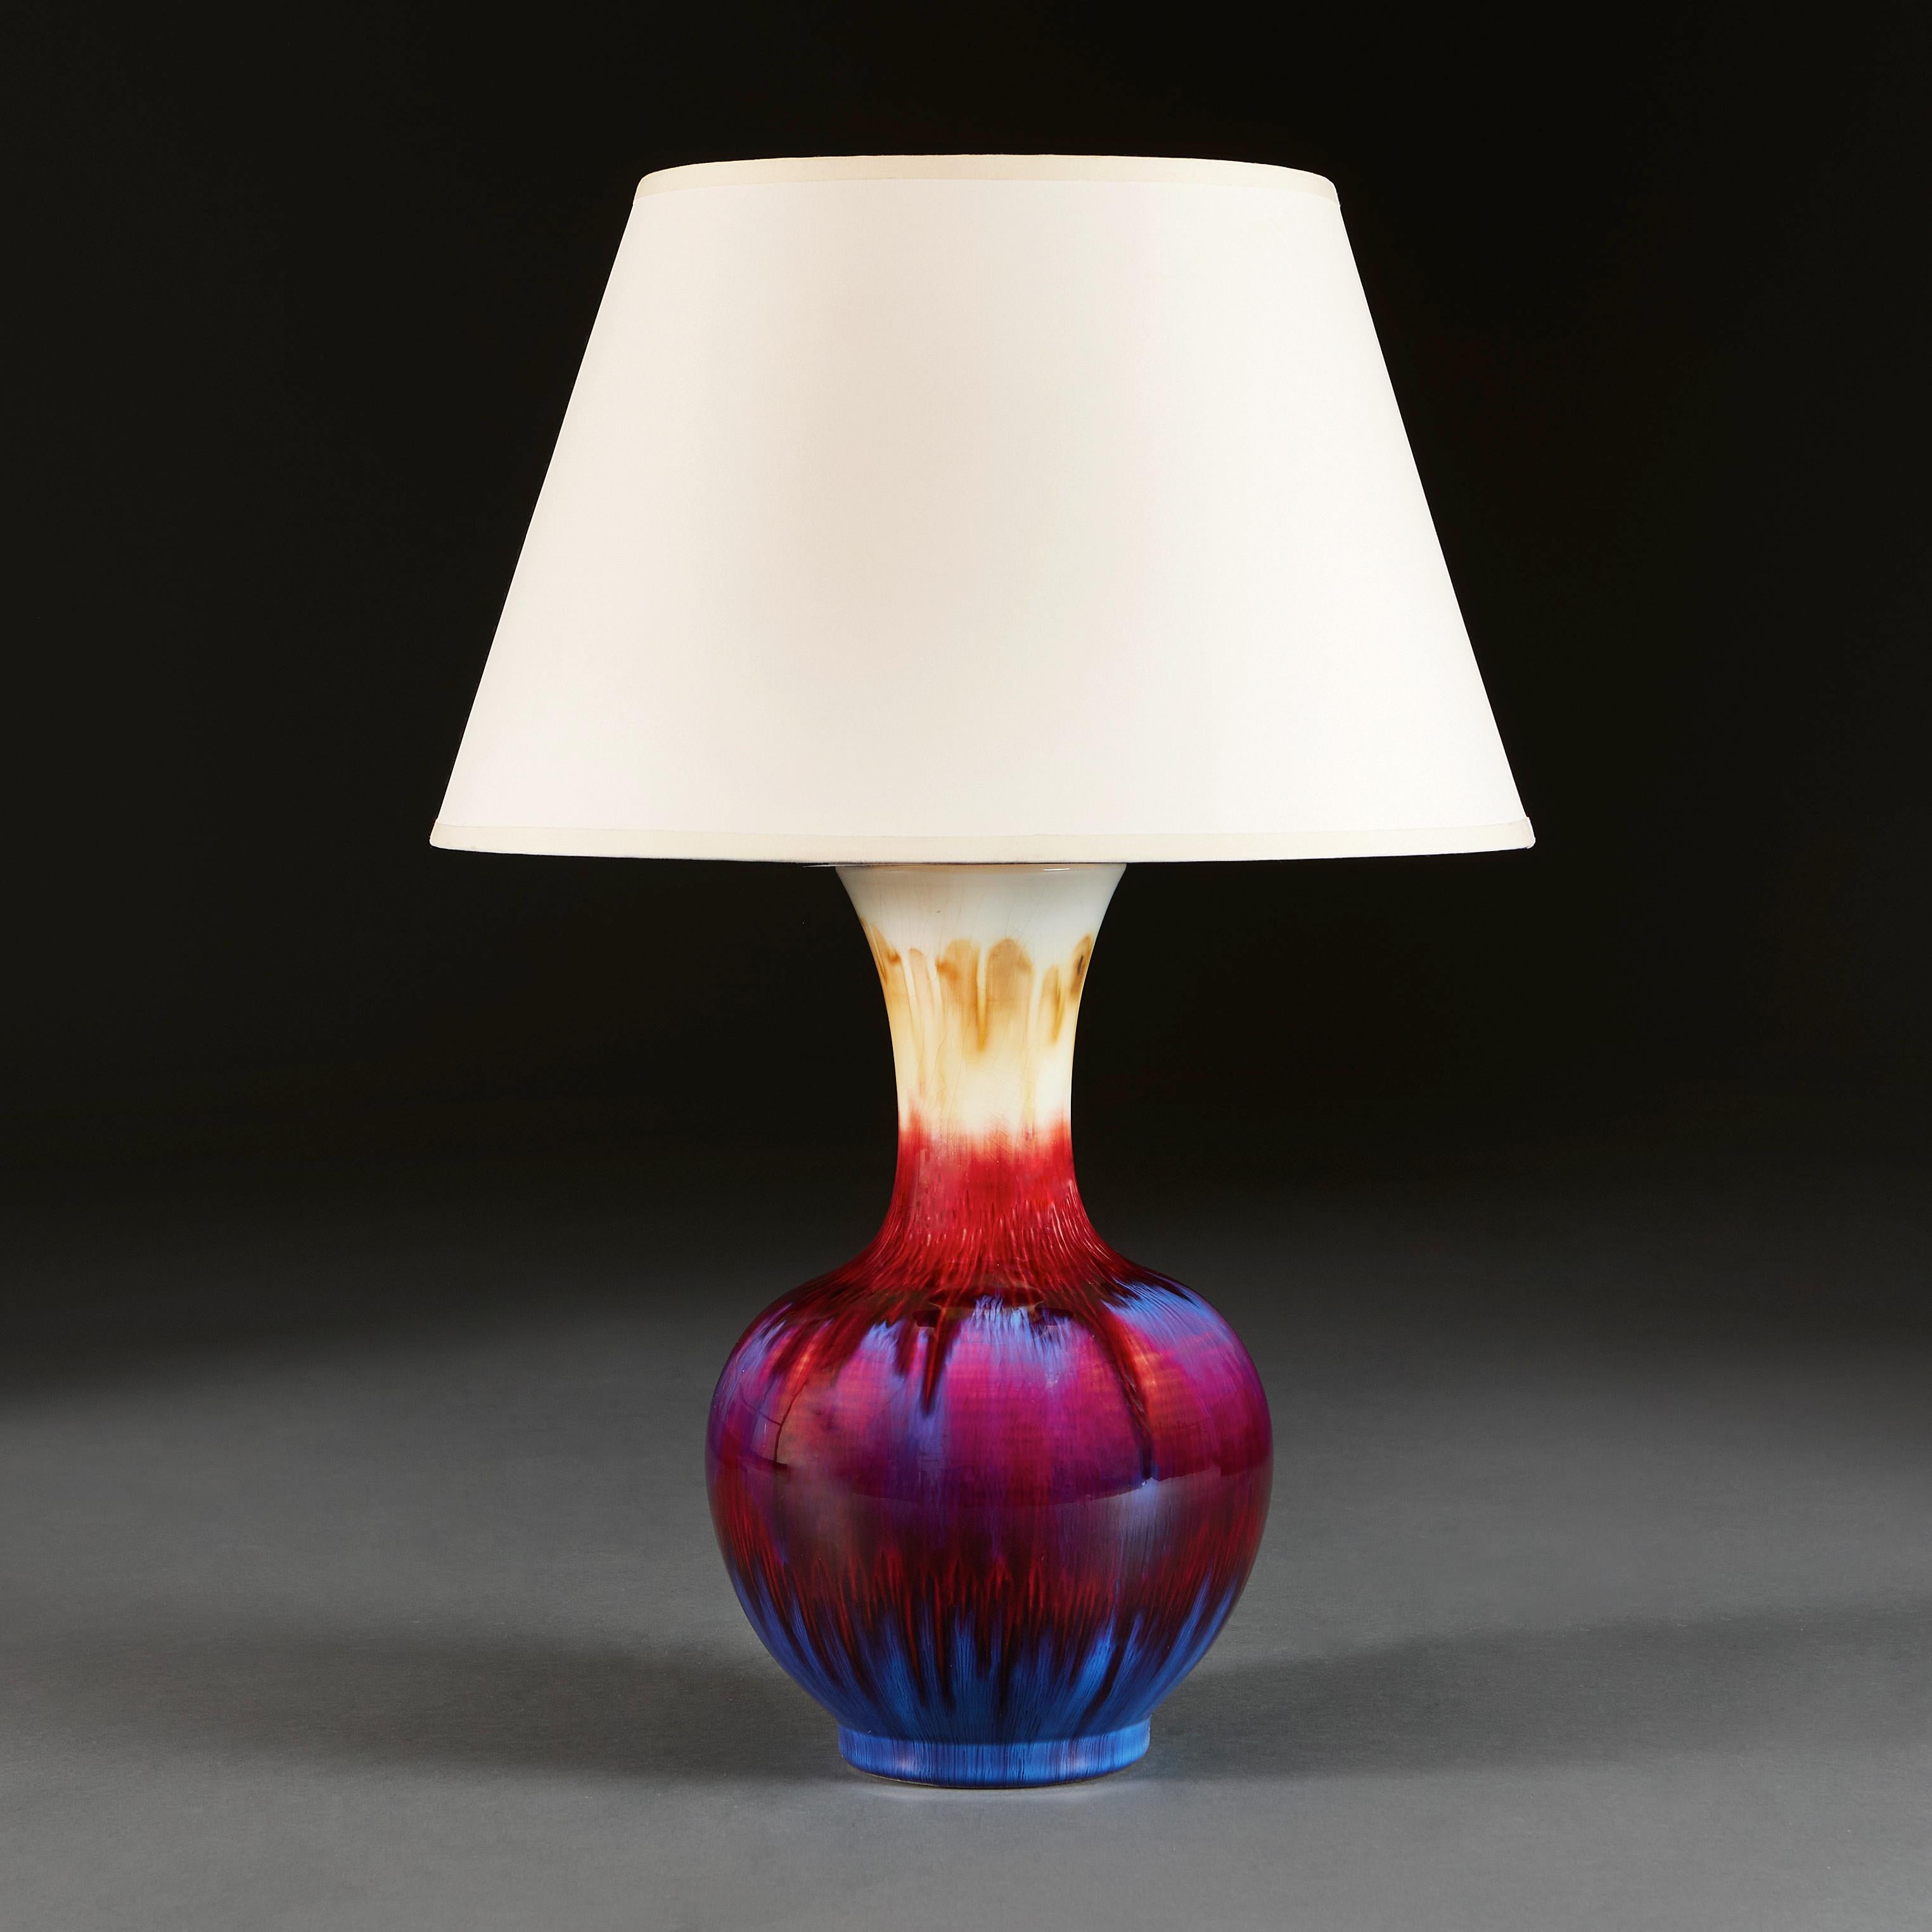 China, circa 1950.

A twentieth century bottle vase with flared neck, with strong red, blue and purple flambe glaze, now converted as a lamp.

Height 35.00cm.
Diameter 22.00cm.

Please note: This is currently wired for the UK with BC bulb